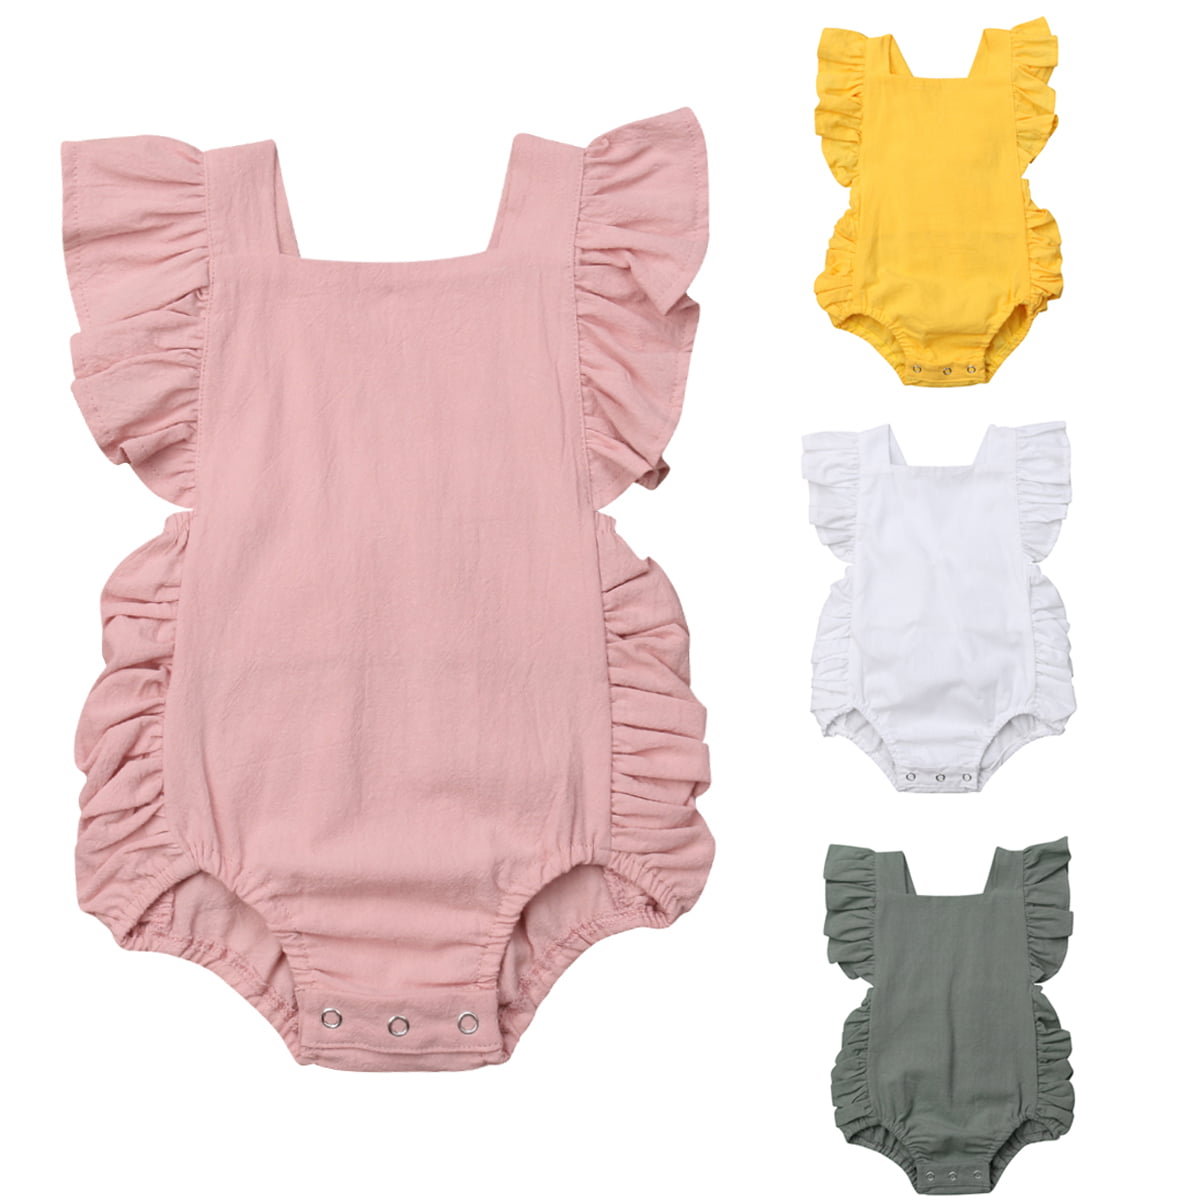 Newborn Rompers Infant Baby Girl Jumpsuit Outfit Kid Sleeveless Ruffled Bodysuit